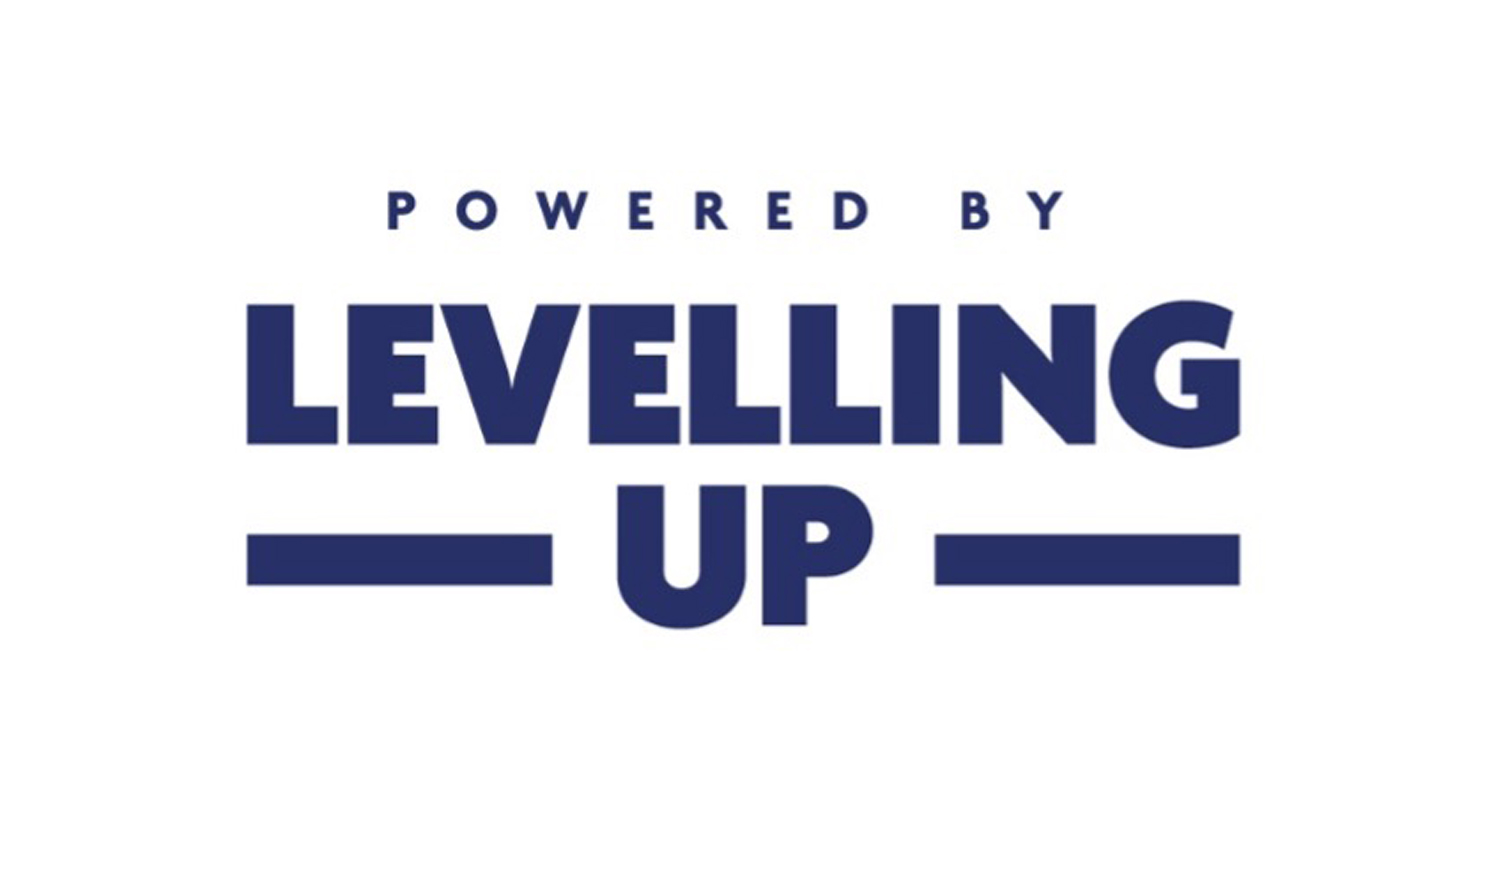 Powered by Levelling Up logo with blue text against a white background